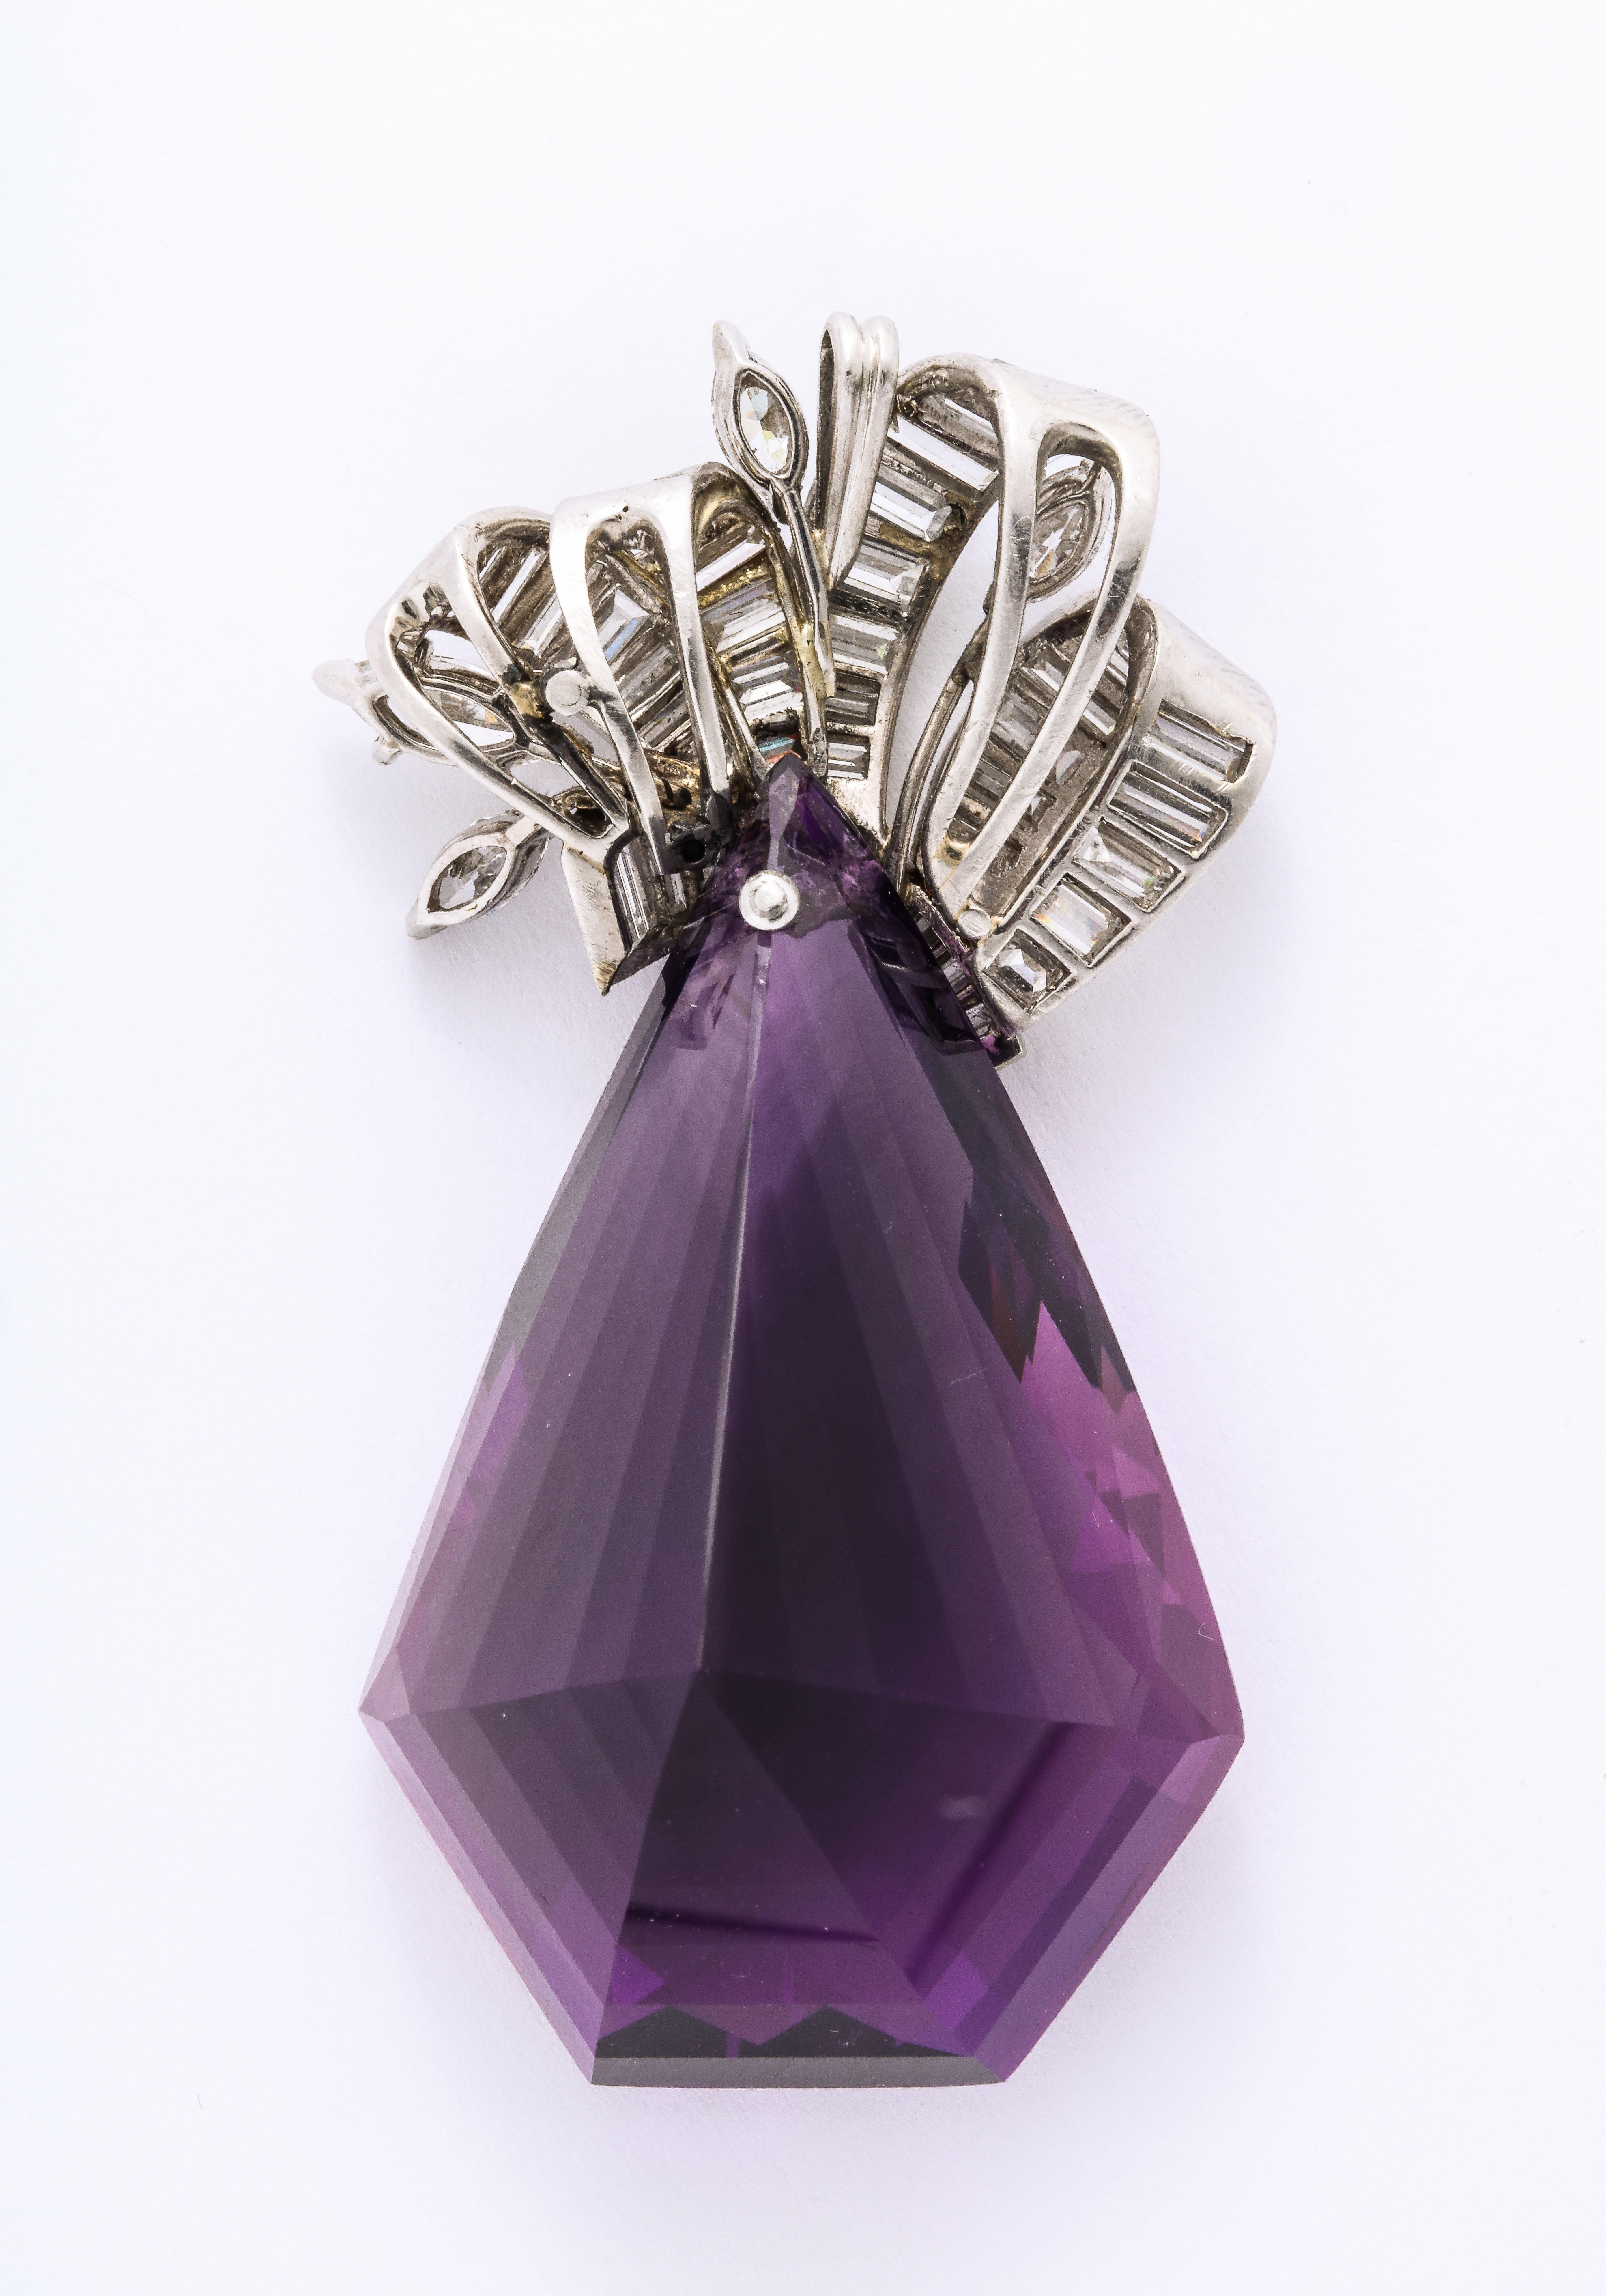 Amethyst Diamond Platinum Slide Pendant. The amethyst measures 39 cts and the Platinum is unmarked but tested. Circa 1940.

Materials:
Platinum, 21.9 dwt

Stones:
Diamonds: 5.80 cts TW
Trapezoid Amethyst 39 cts